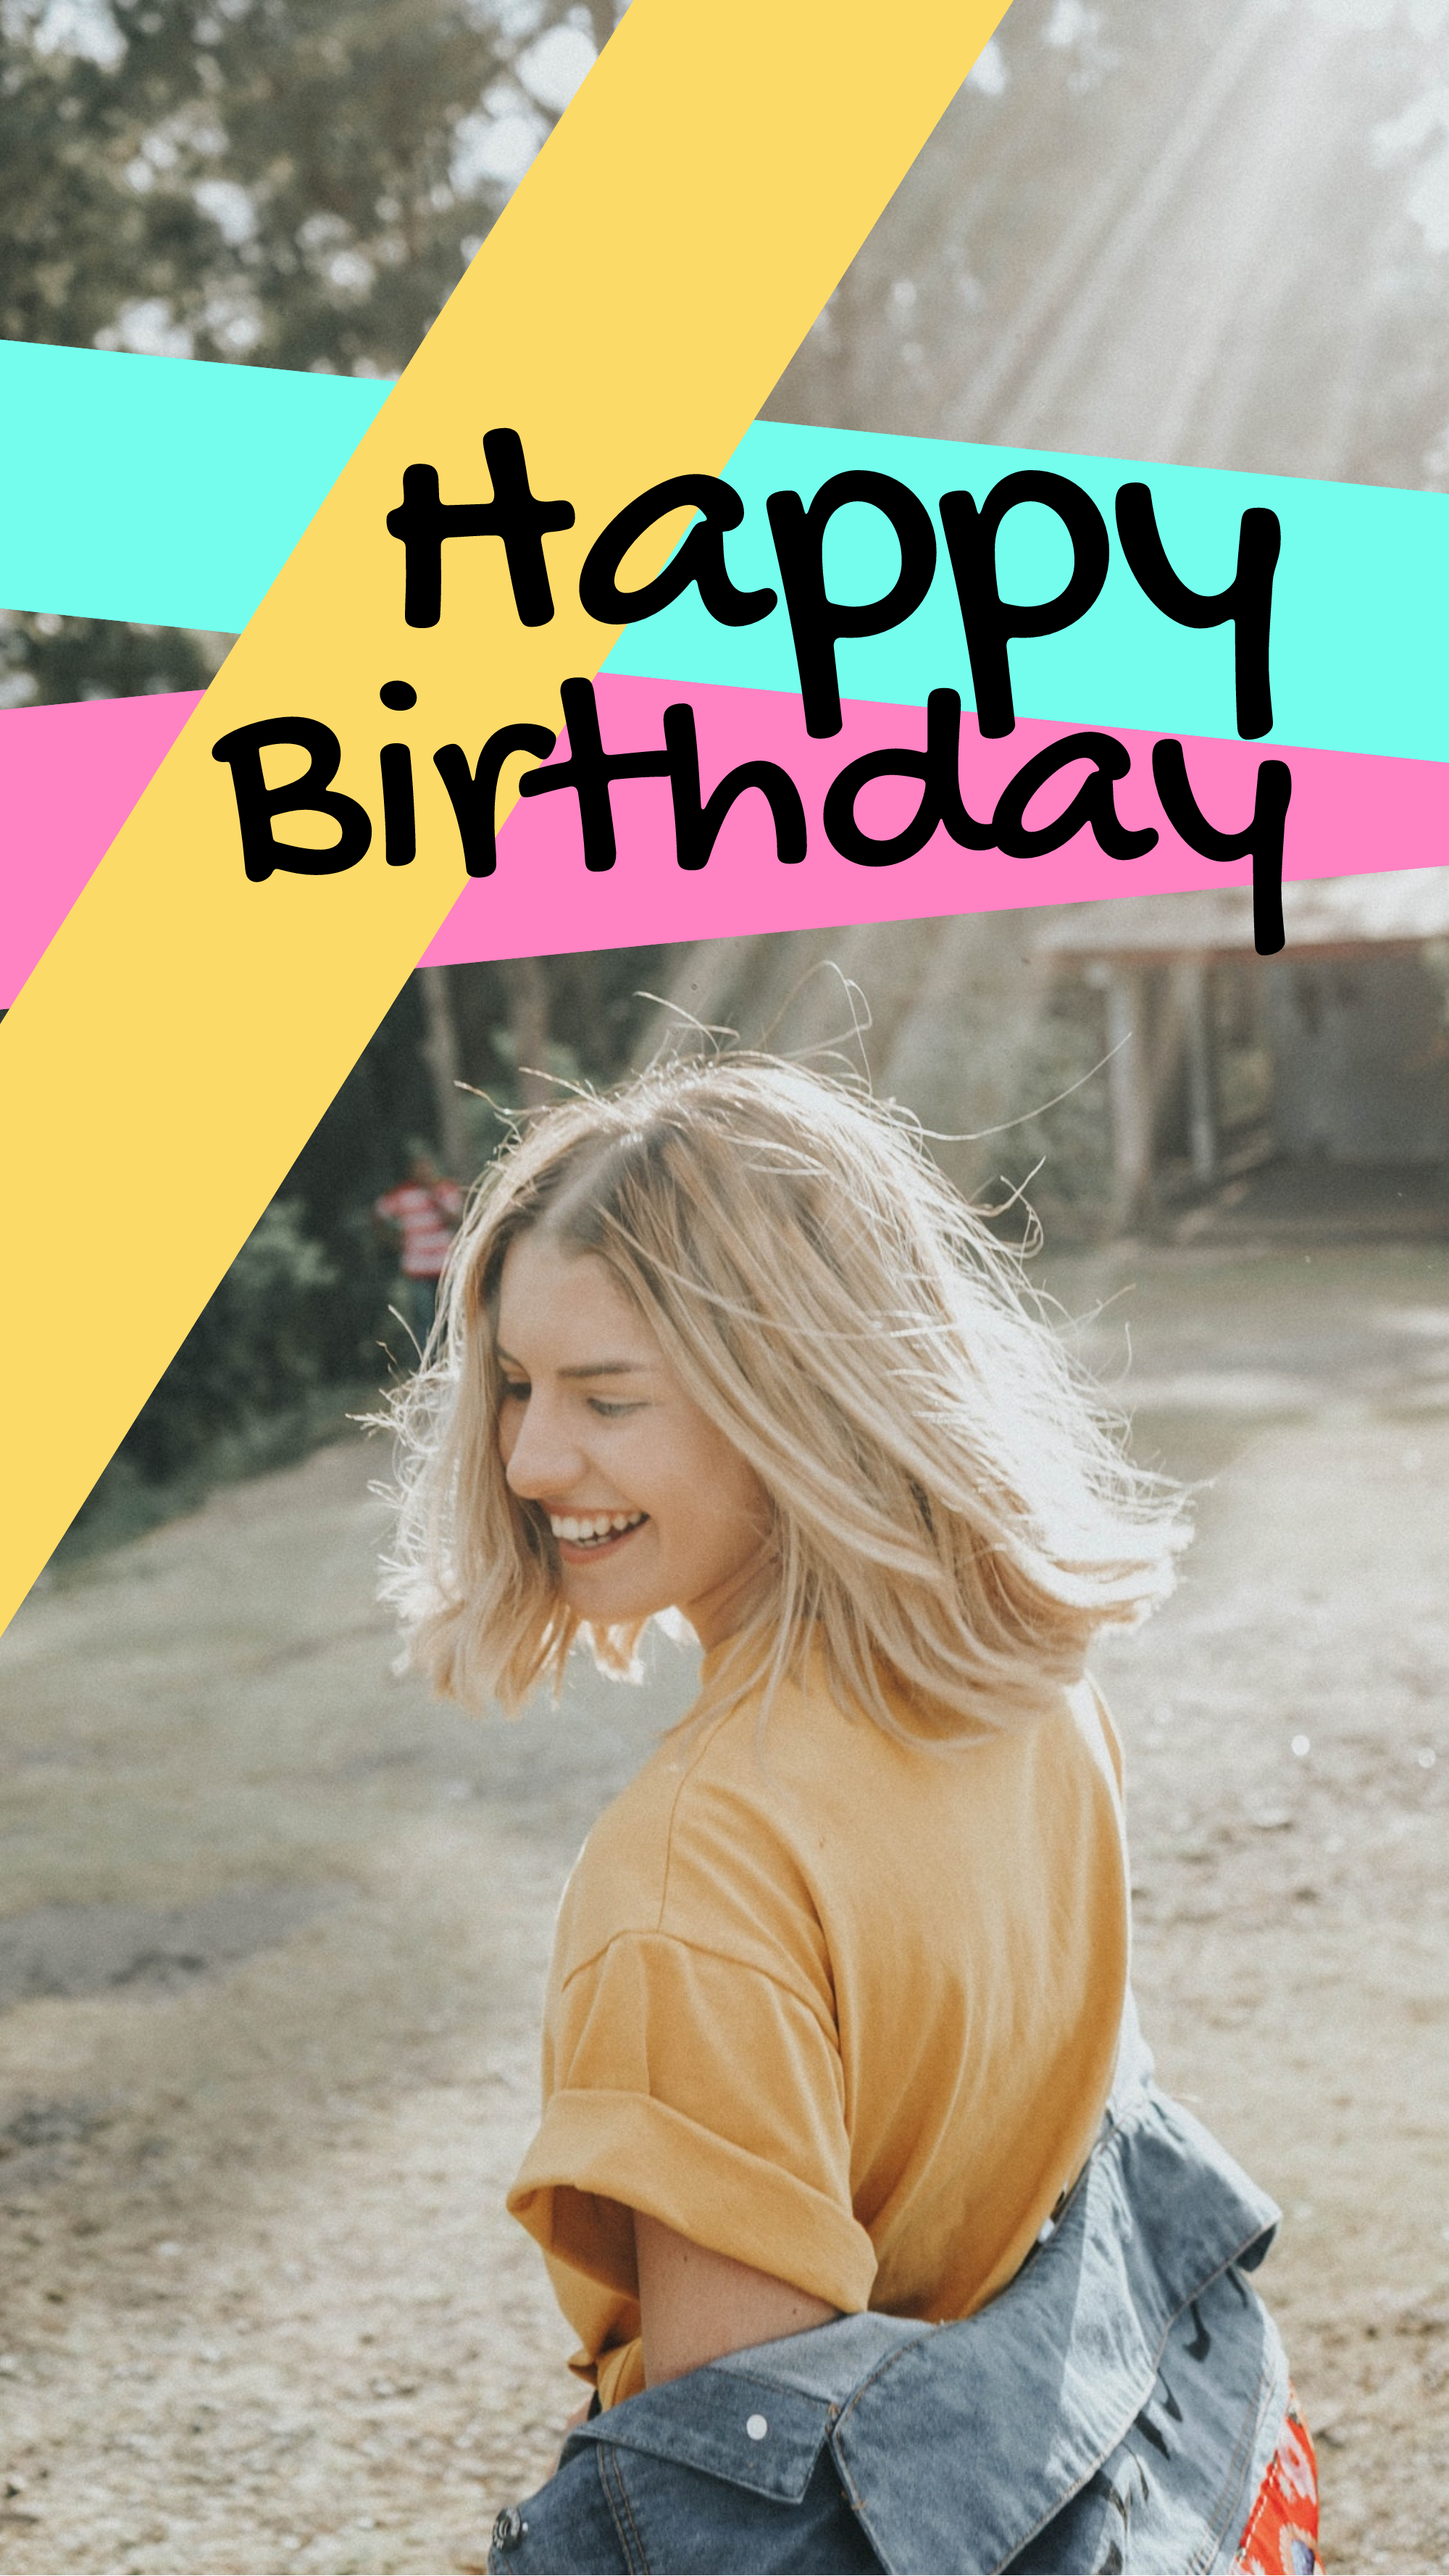 Happy Birthday 7 Adorable Story Ideas For Instagram 2019